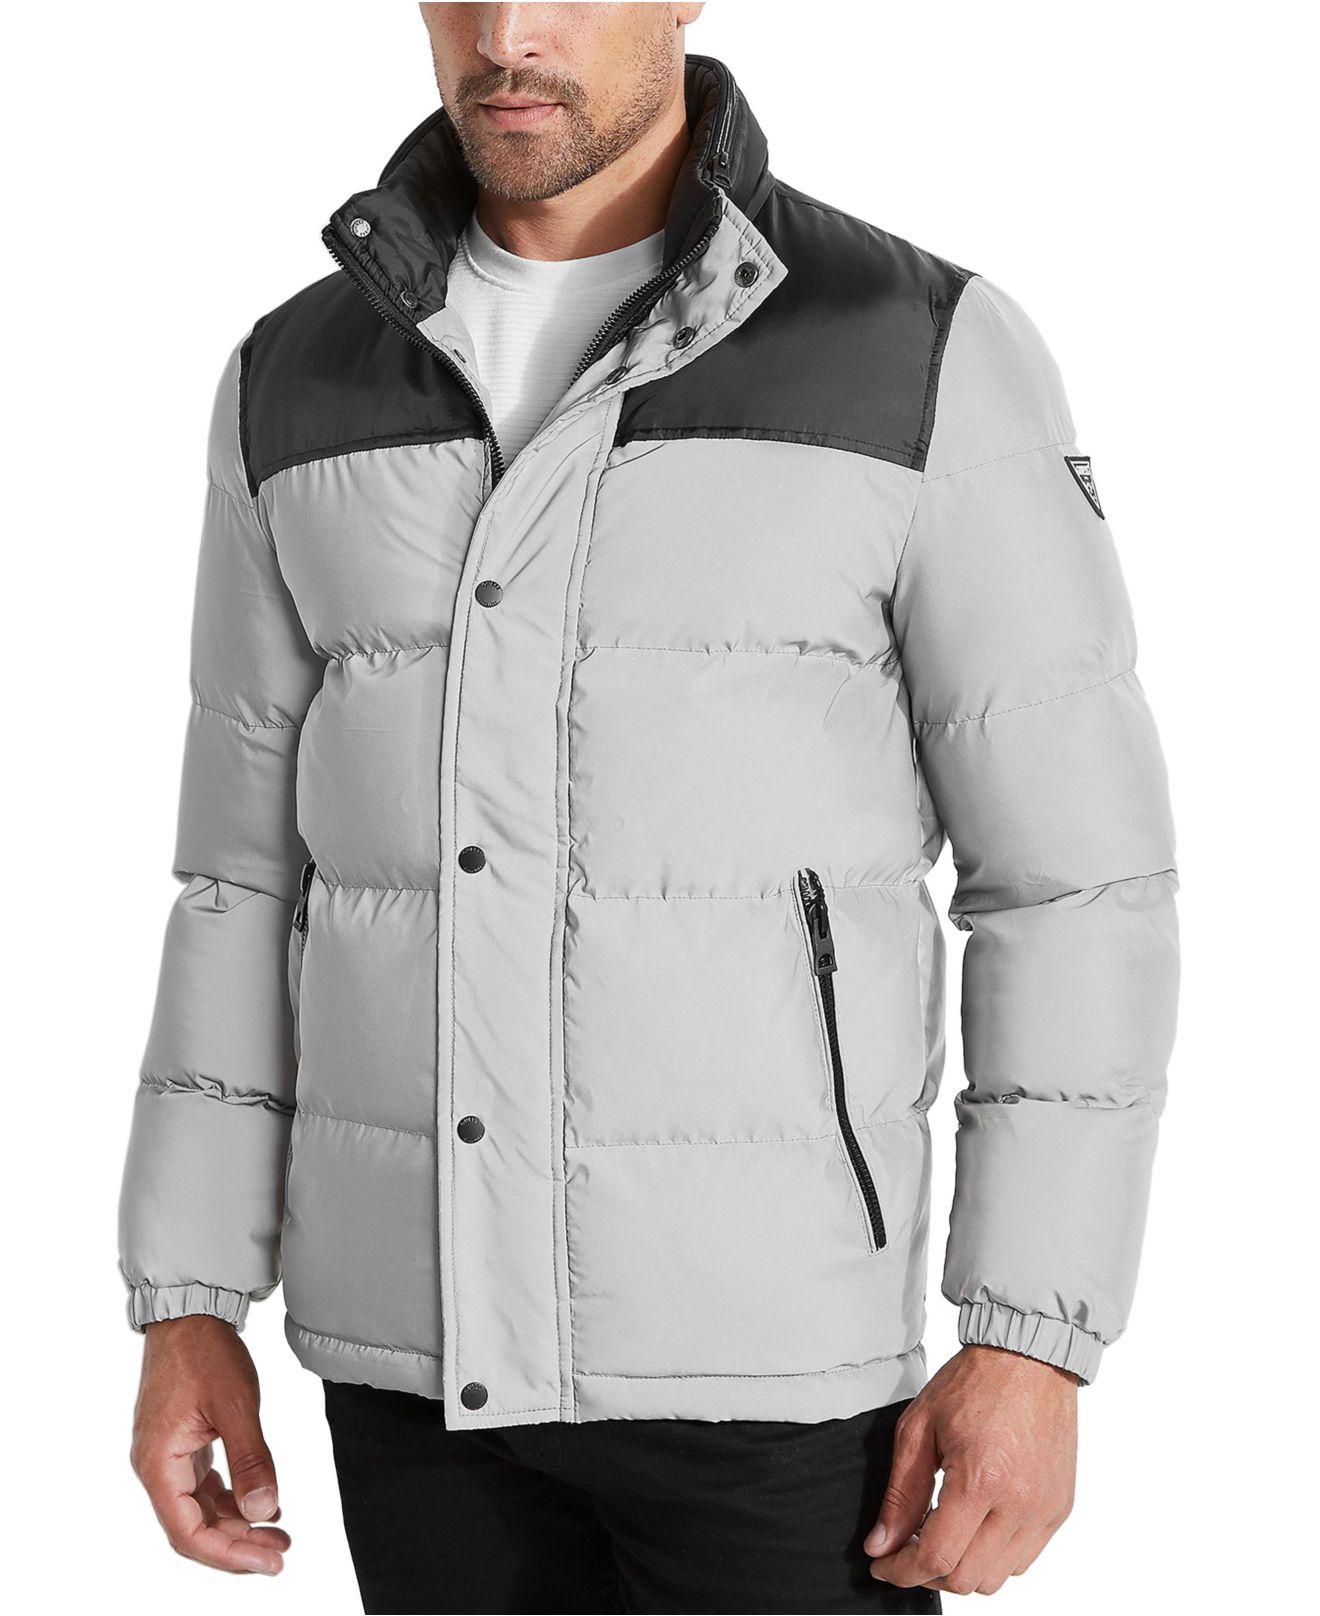 Guess Synthetic Colorblocked Reflective Puffer Jacket in Silver (Metallic)  for Men - Lyst